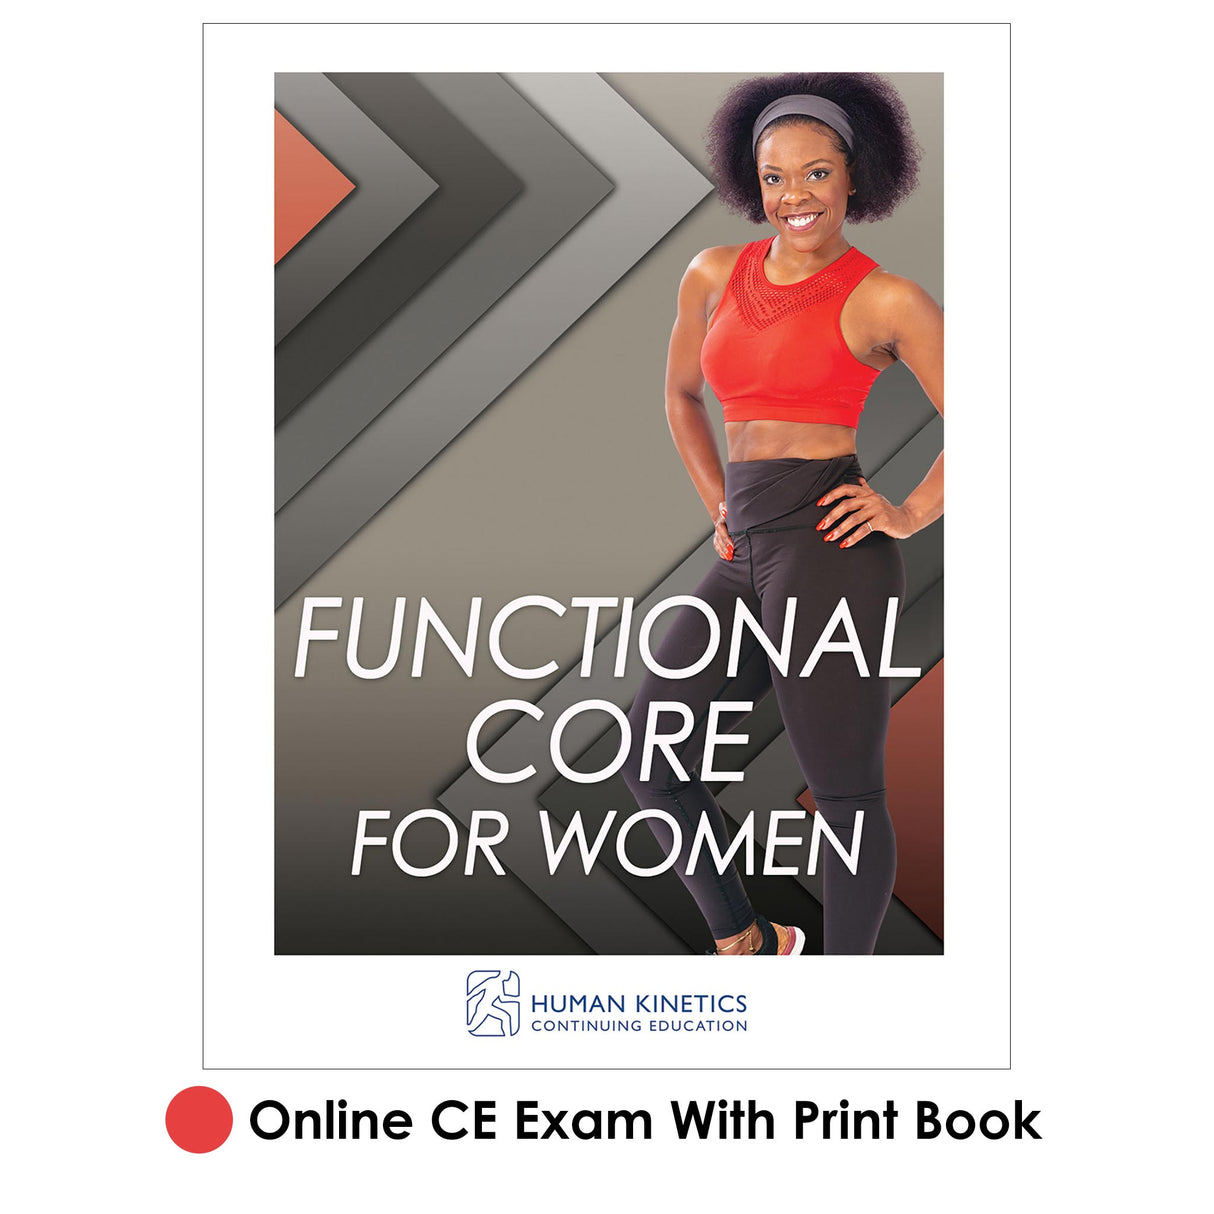 Functional Core for Women Online CE Exam With Print Book